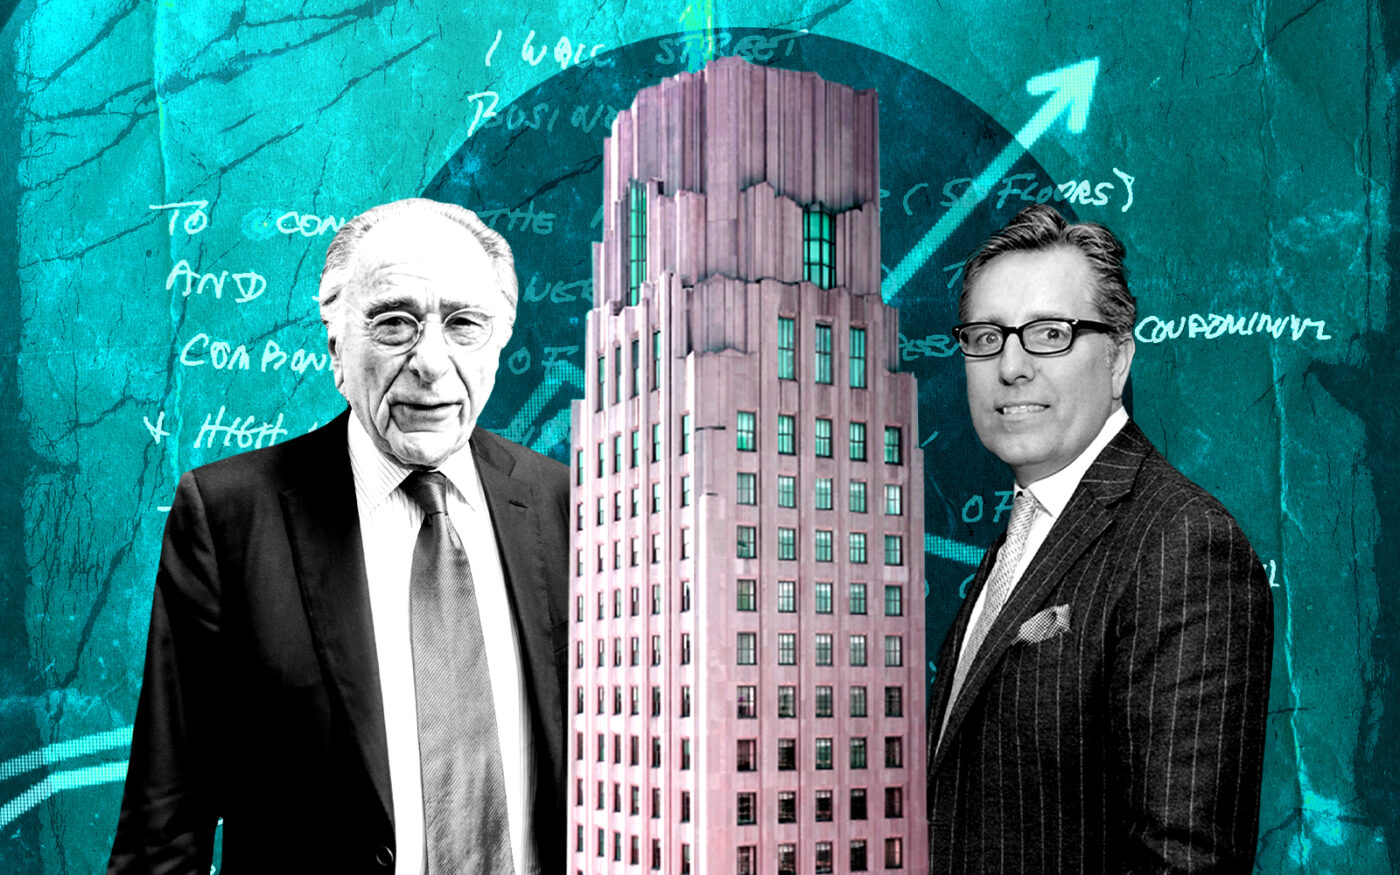 From left: Harry Macklowe and Compass' Kirk Rundhaug with One Wall Street